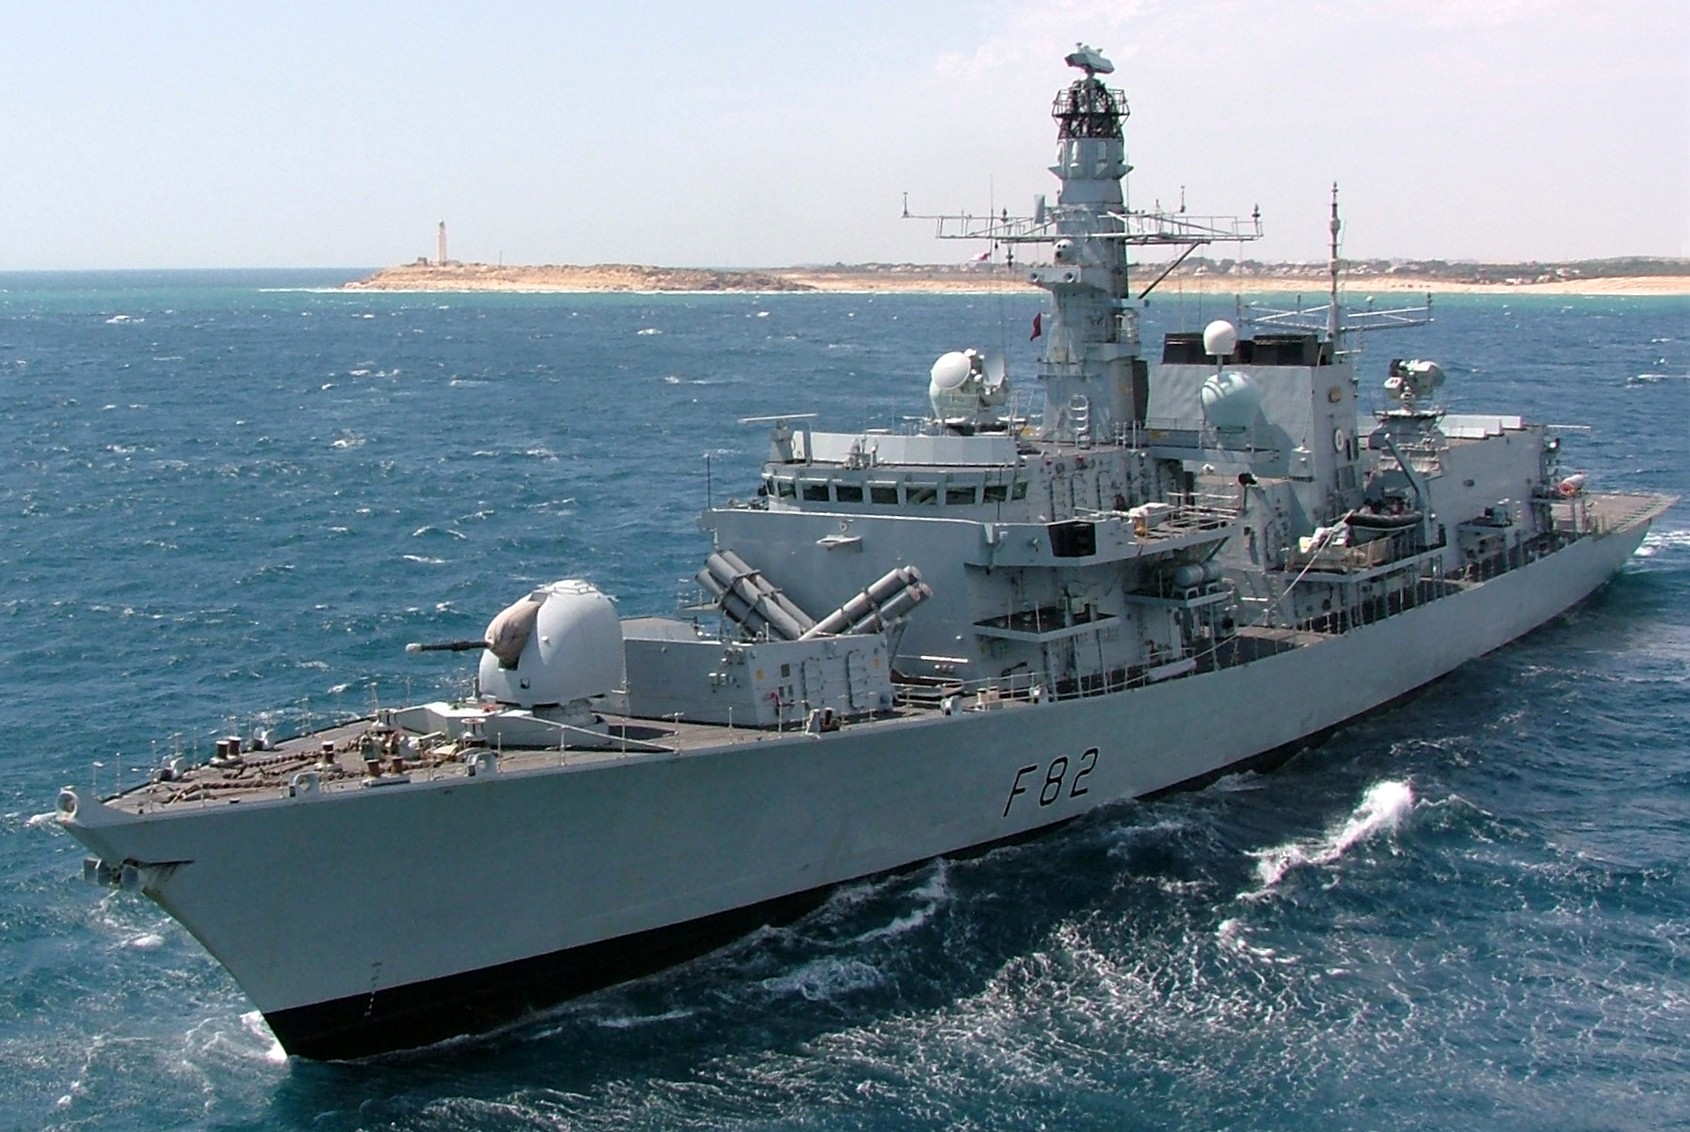 f-82 hms somerset type 23 duke class guided missile frigate ffg royal navy 08